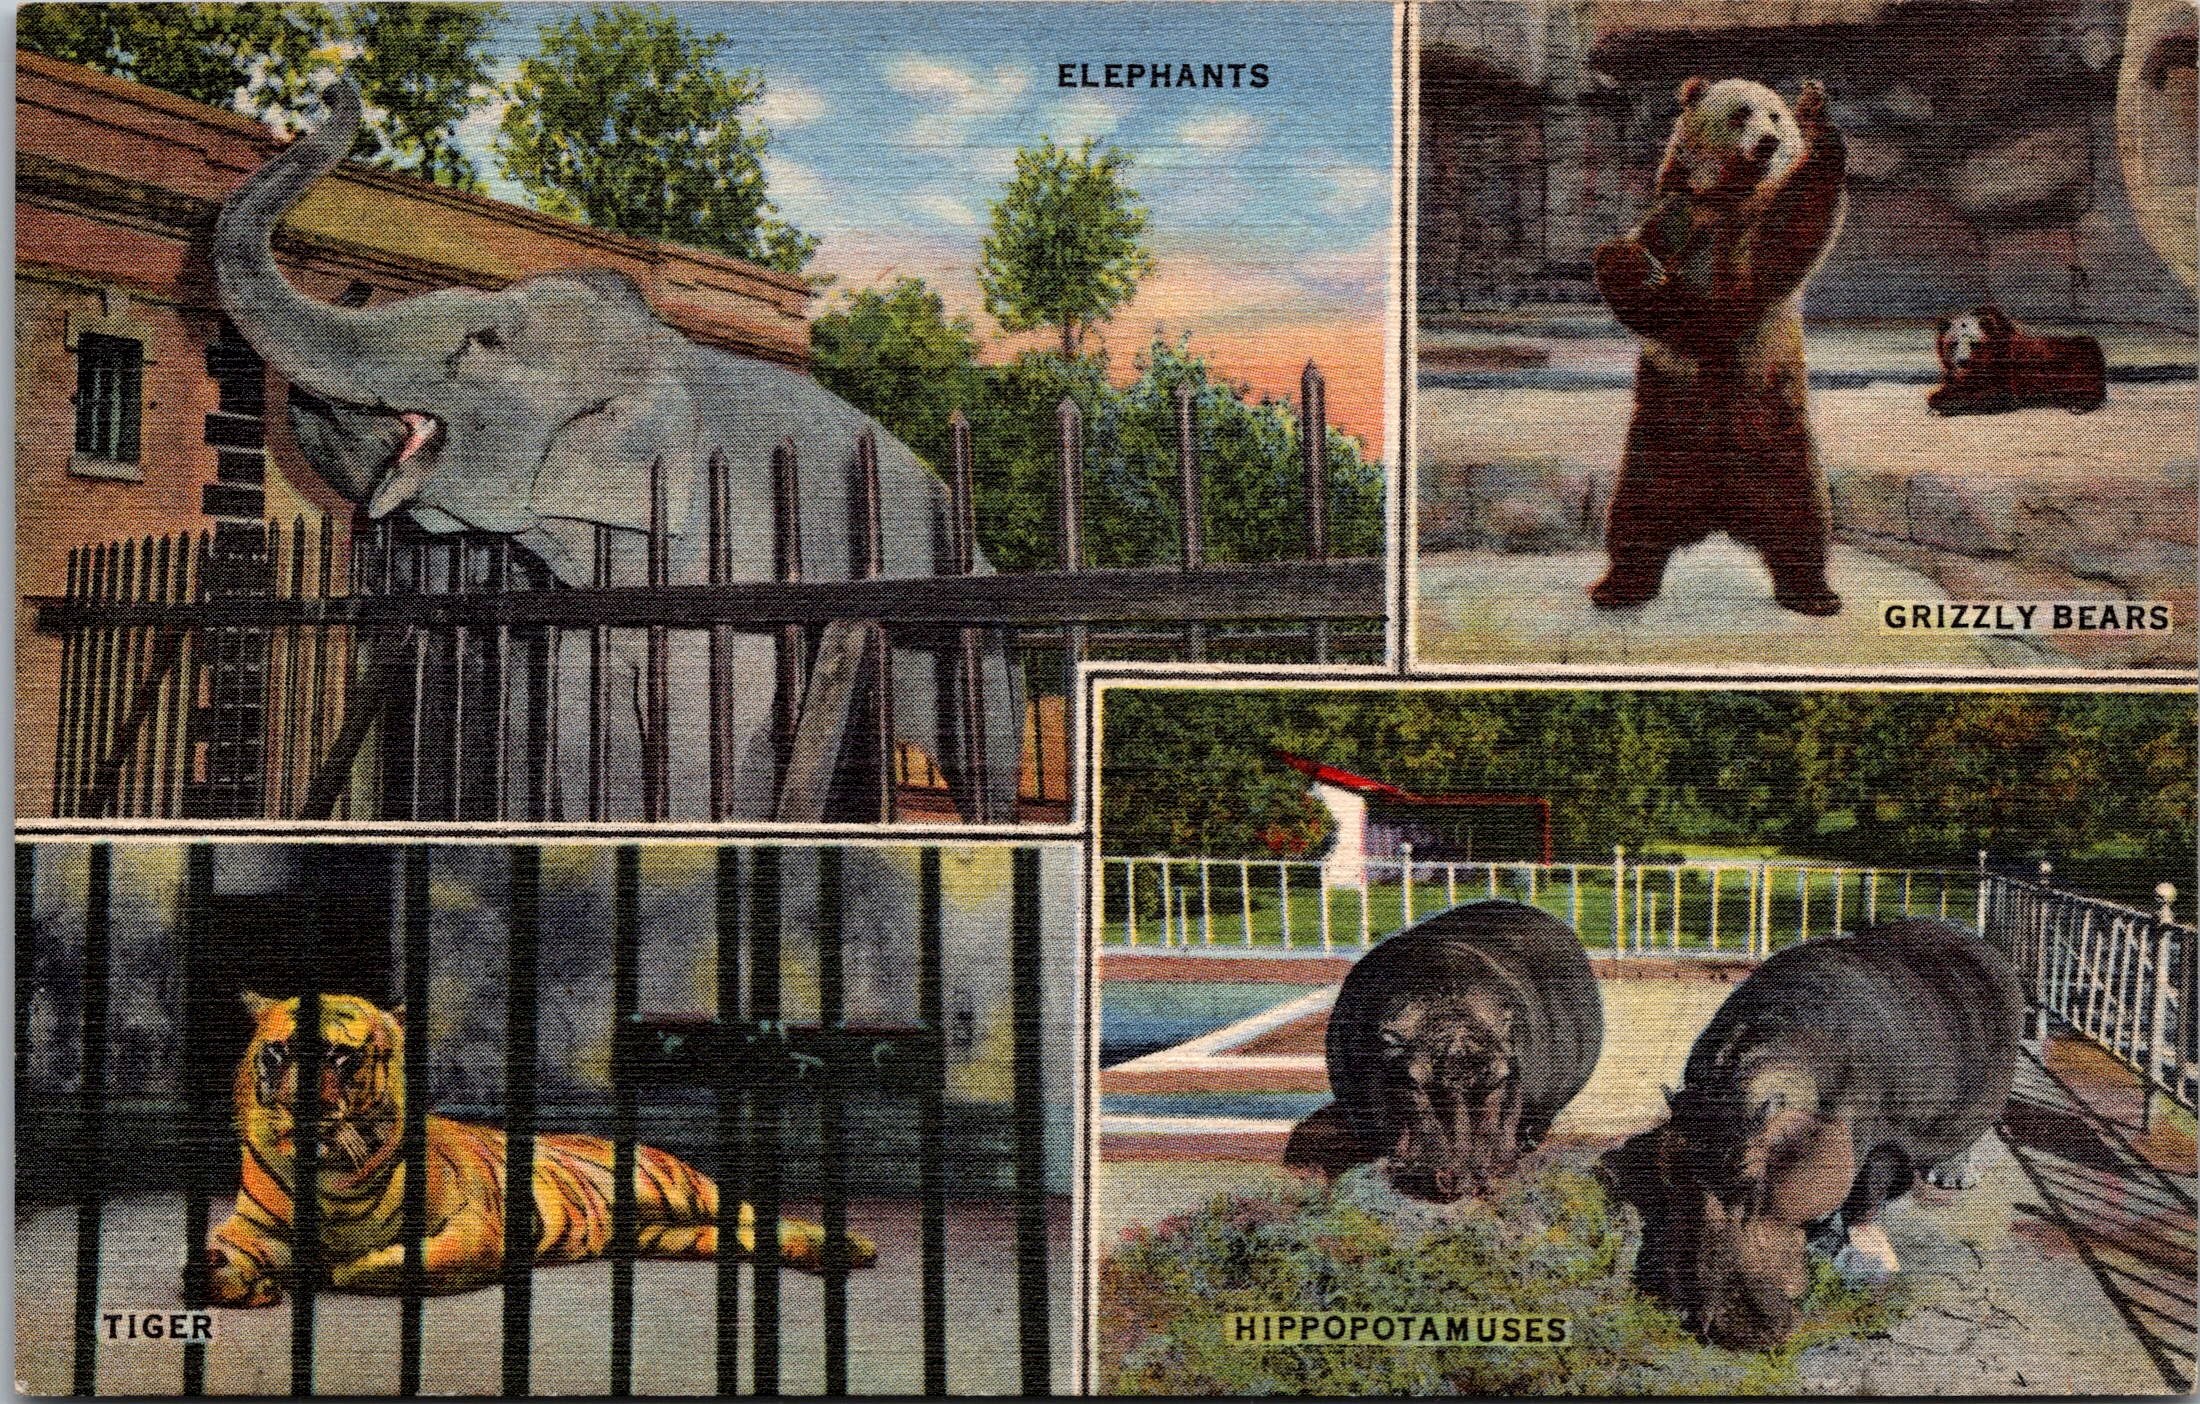 The Memphis Zoo, Scenes , One Of The Finest Zoo’s USA PC